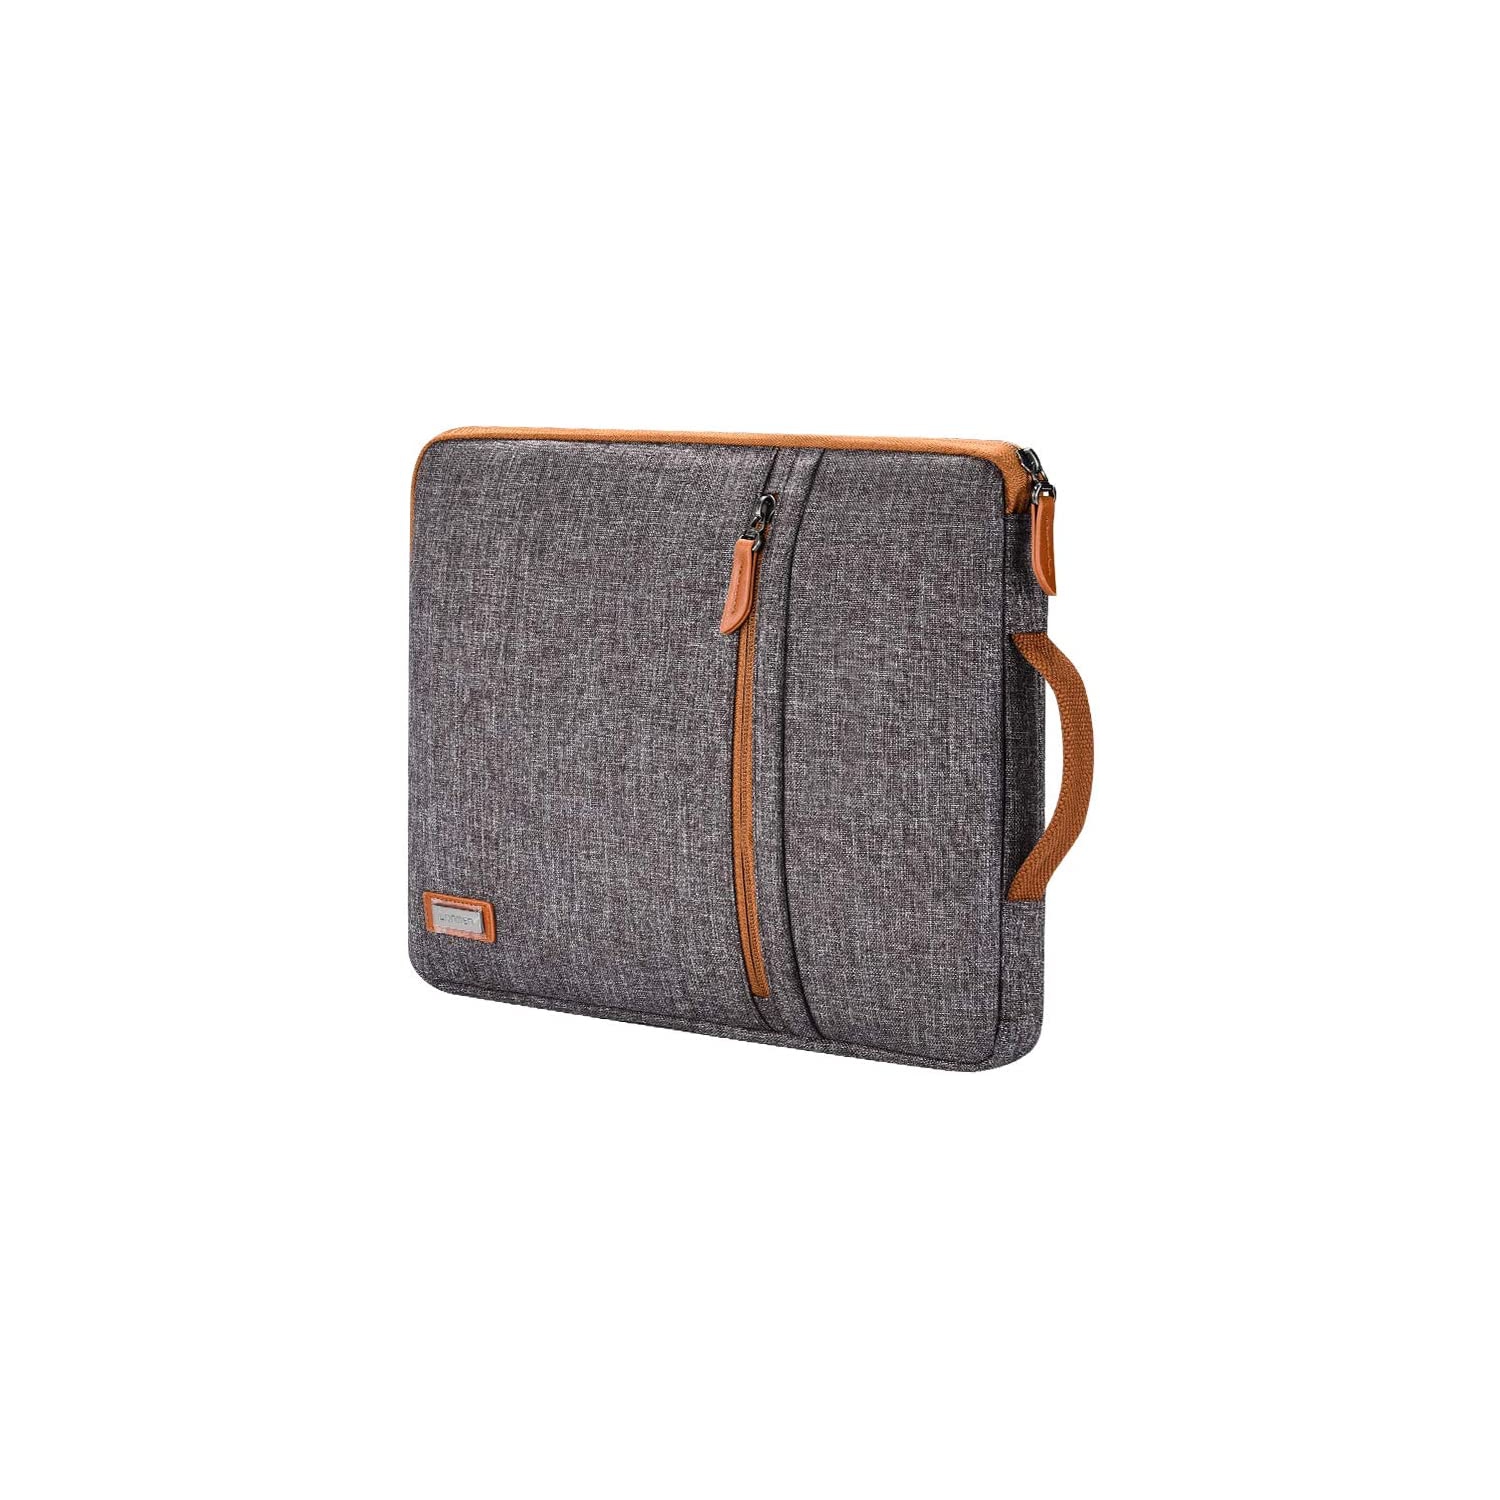 14 inch Laptop Sleeve Case Water-Resistant Handle Bag for Most 14” Computer/Surface Book/Lenovo Flex 4/Yoga